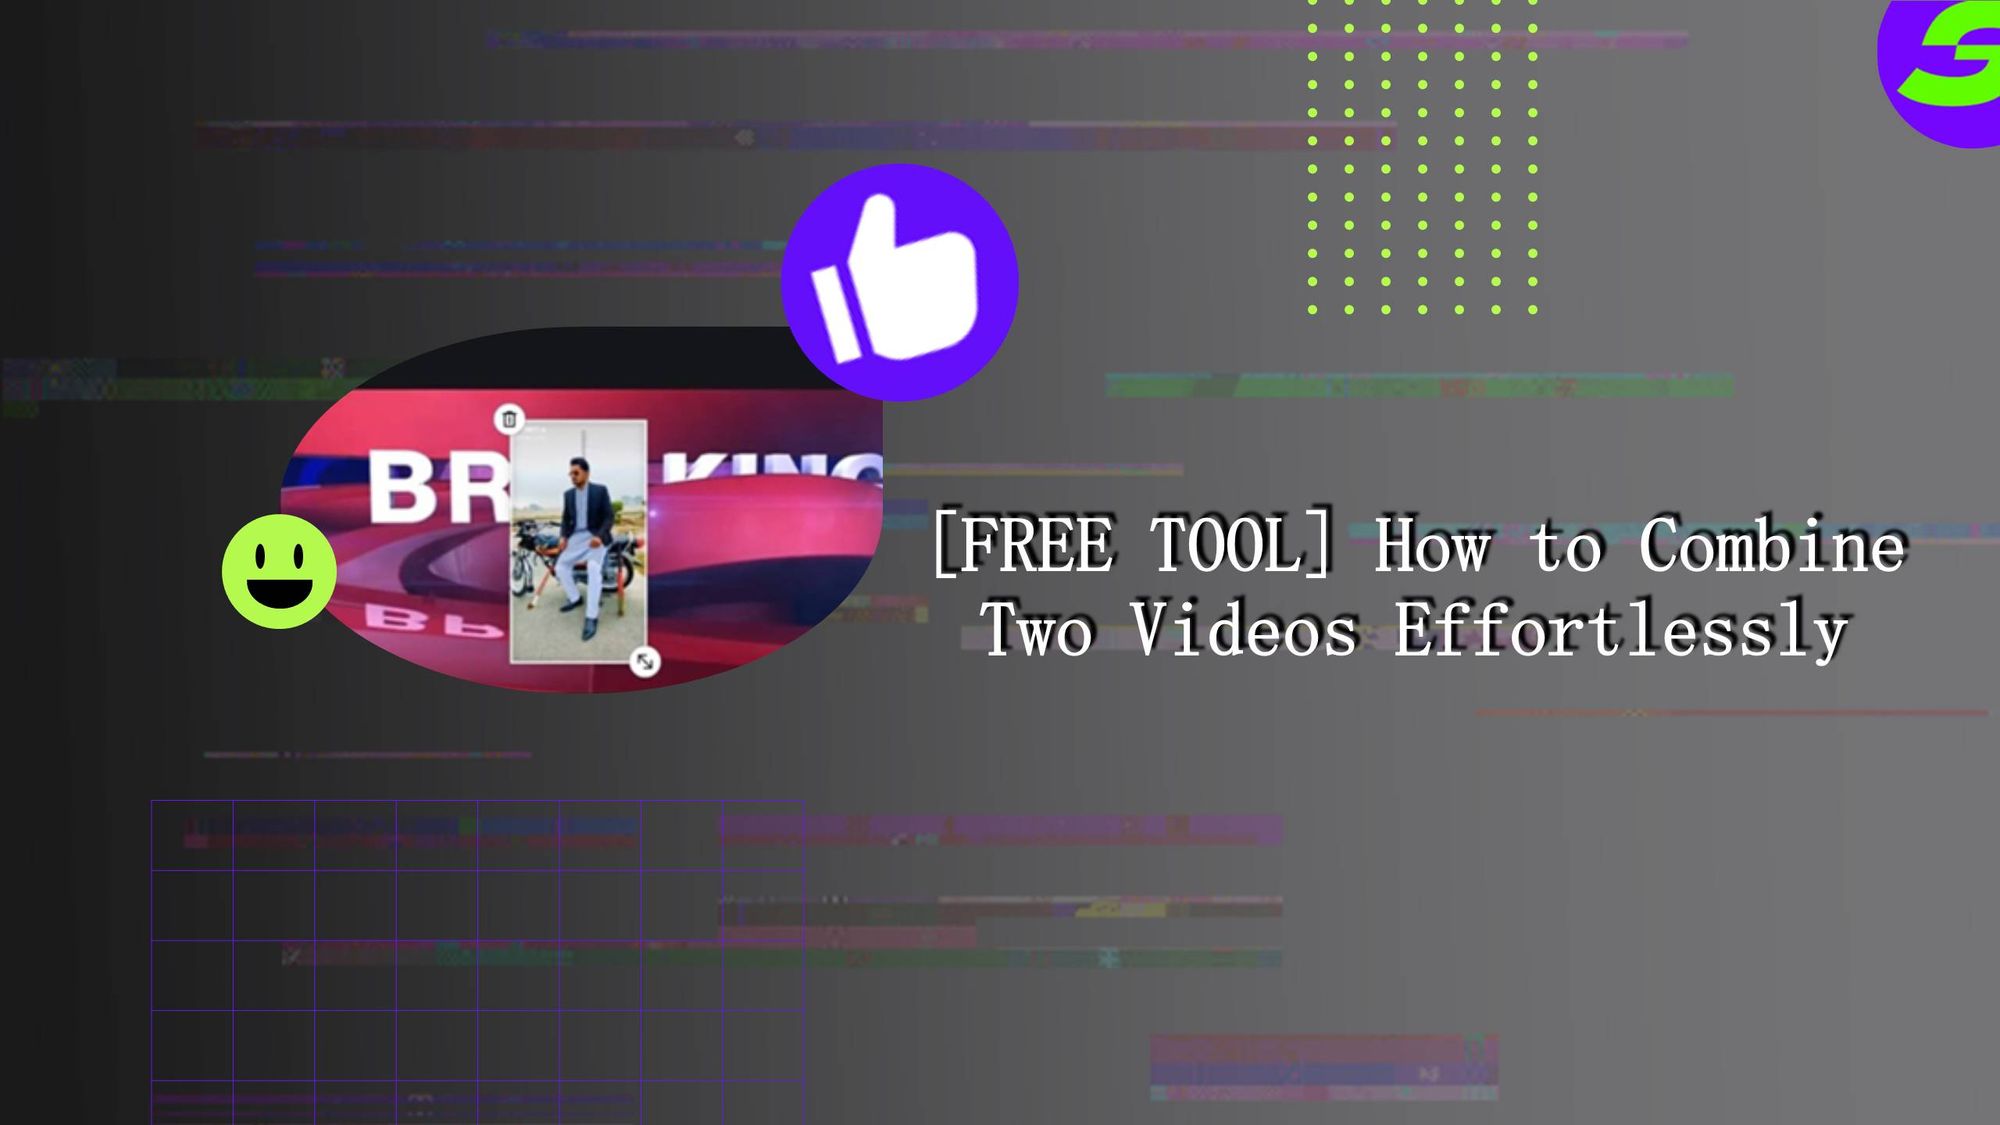 How to Combine Two Videos Effortlessly with free tool